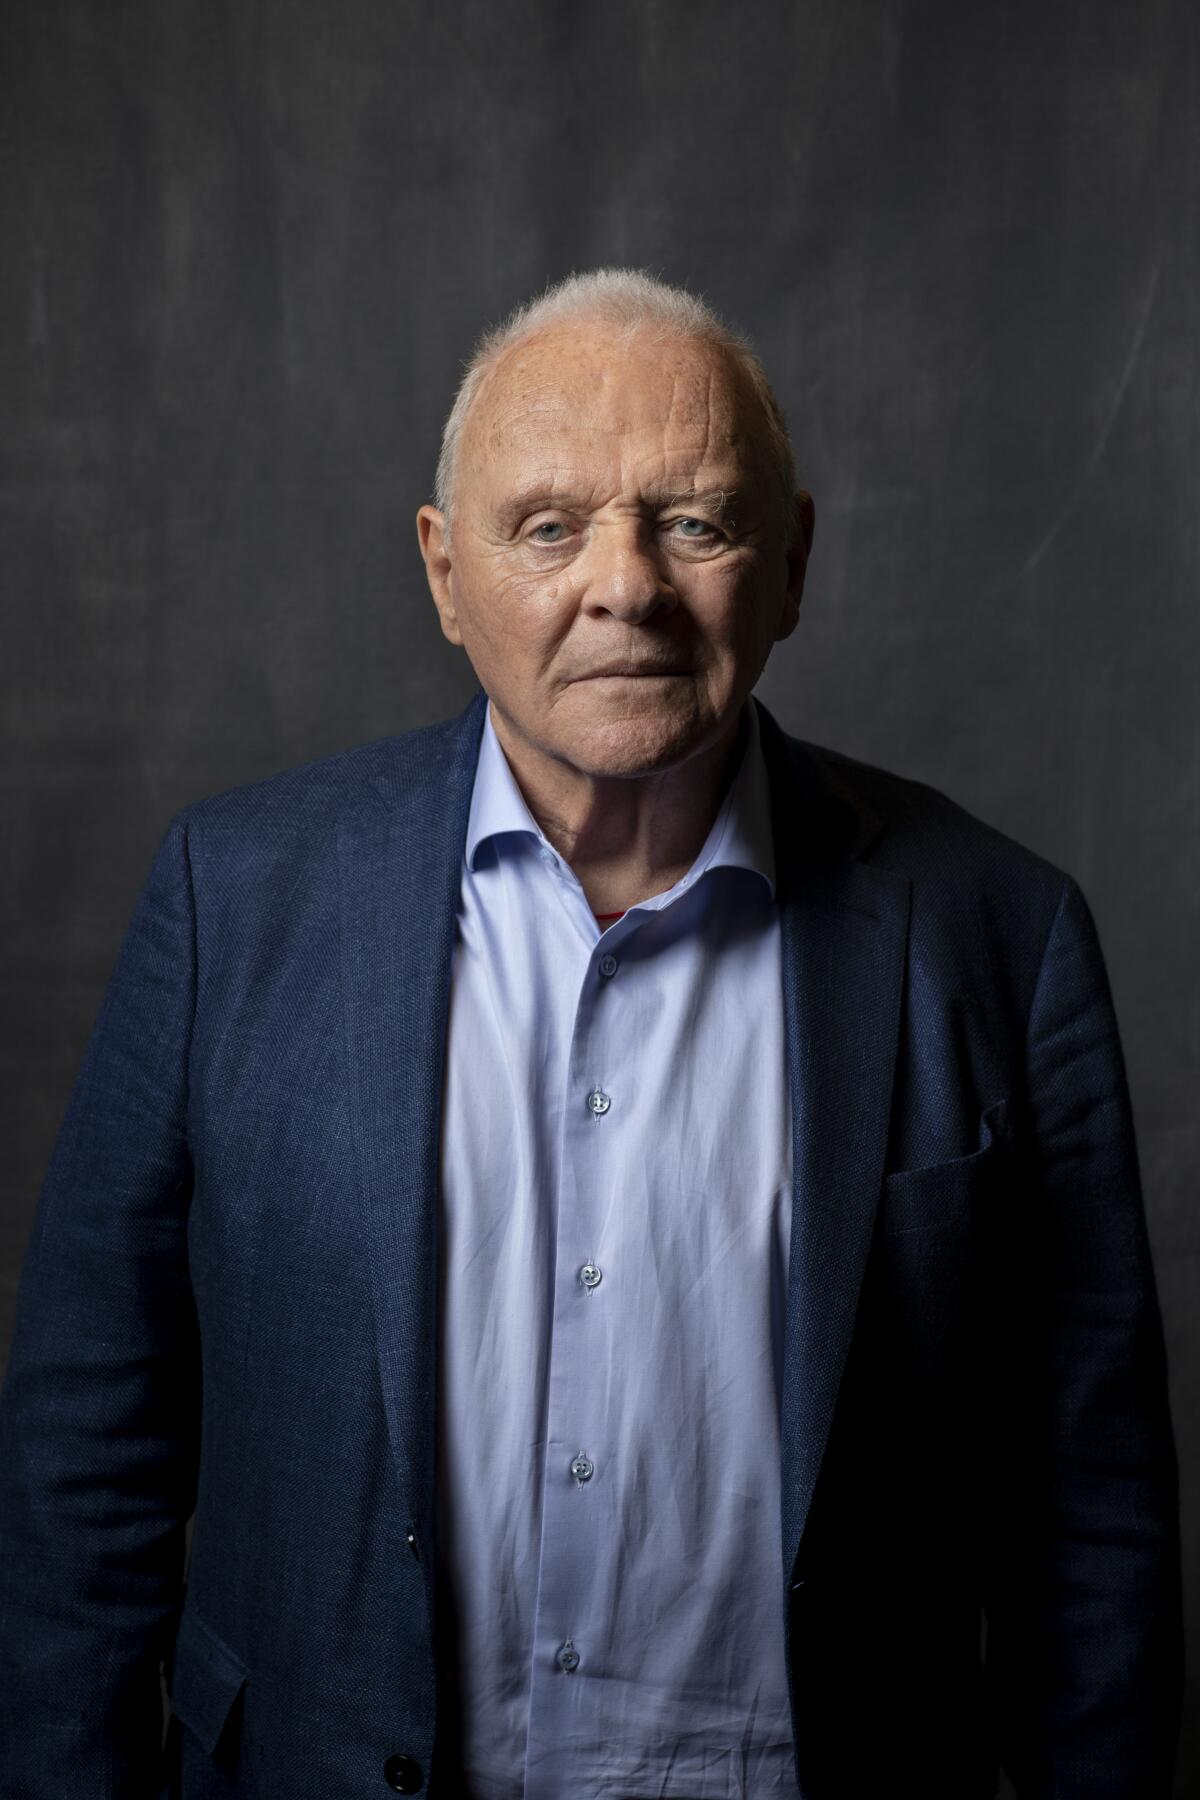 Anthony Hopkins poses in a blue shirt and jacket